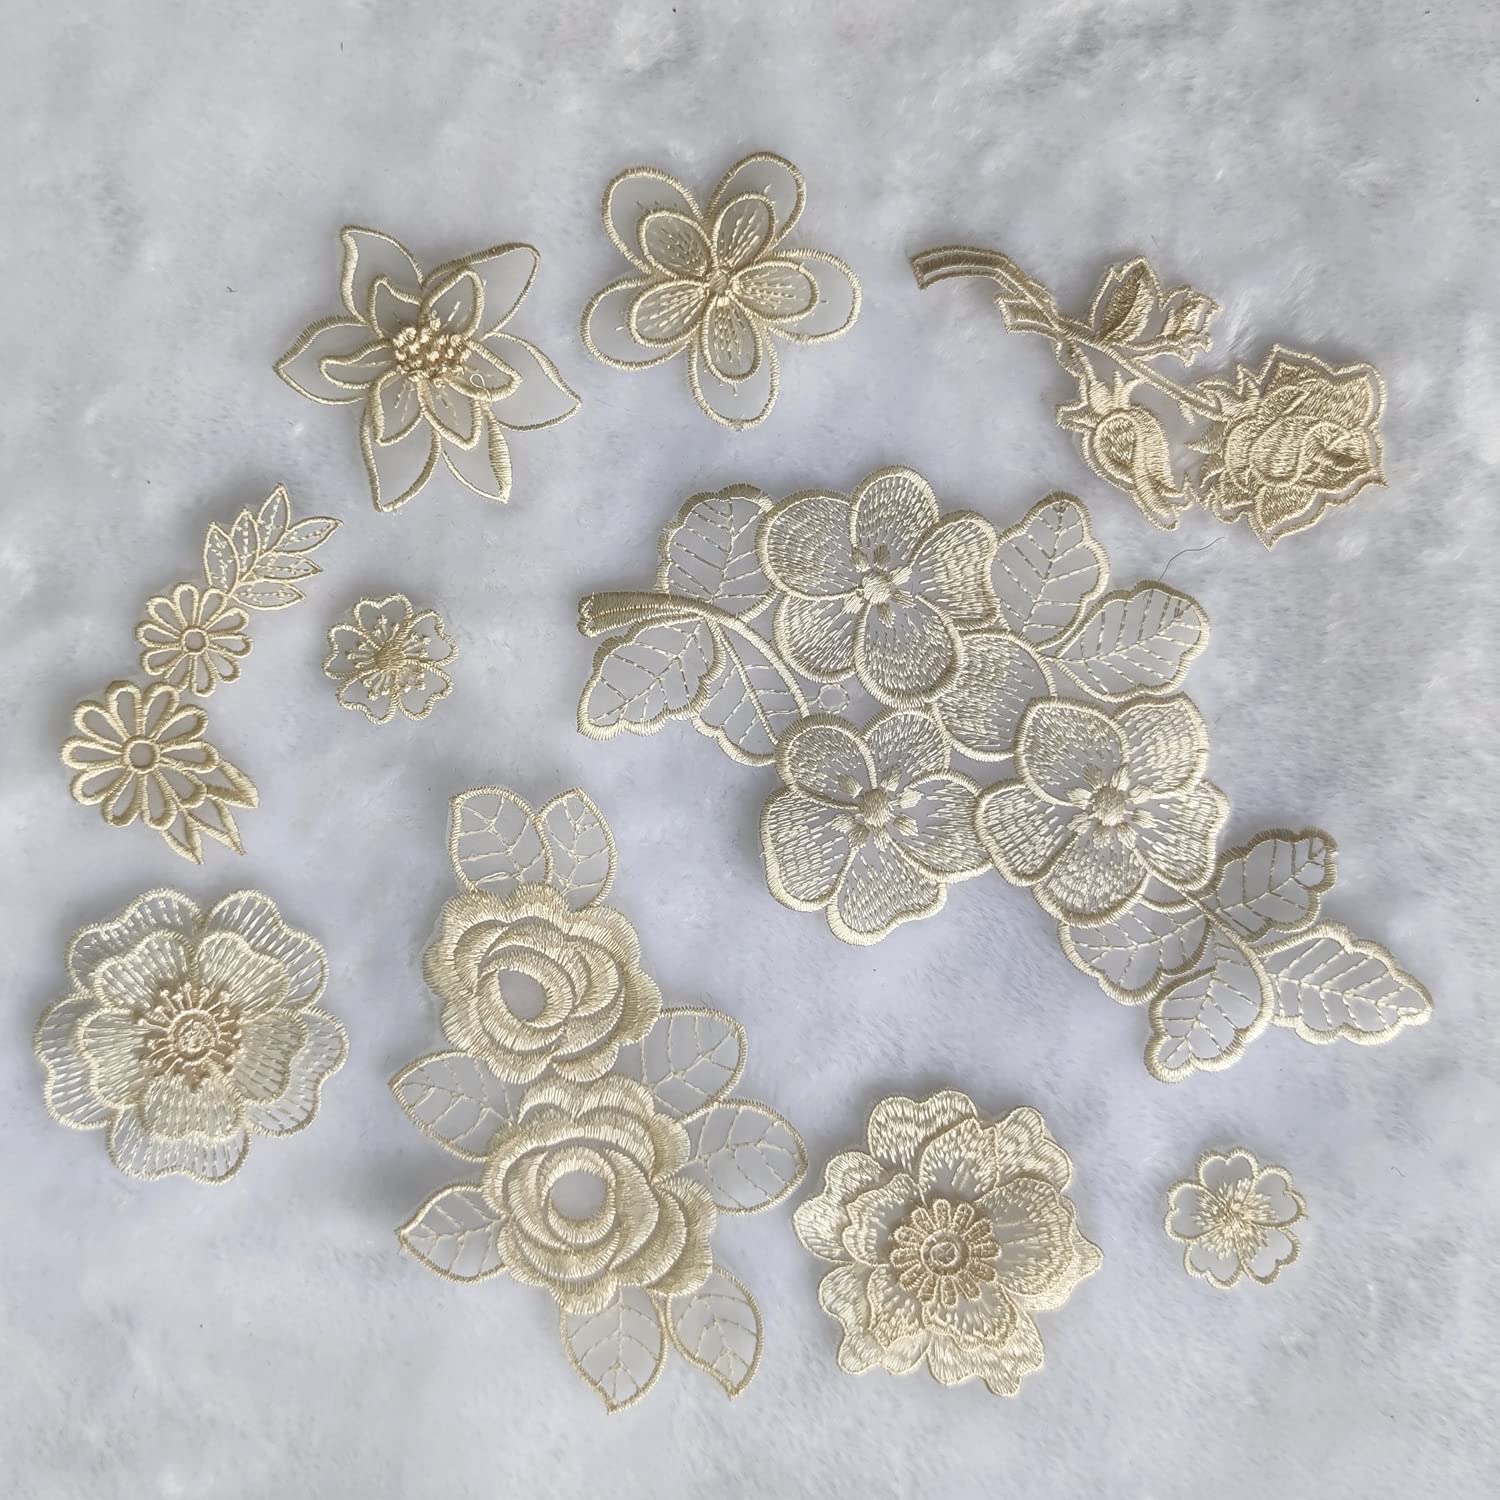 Qililandiy 10 Pcs Beige Mixed Style Embroidery Lace Flower Patches Appliques  DIY Sewing Craft for Decoration